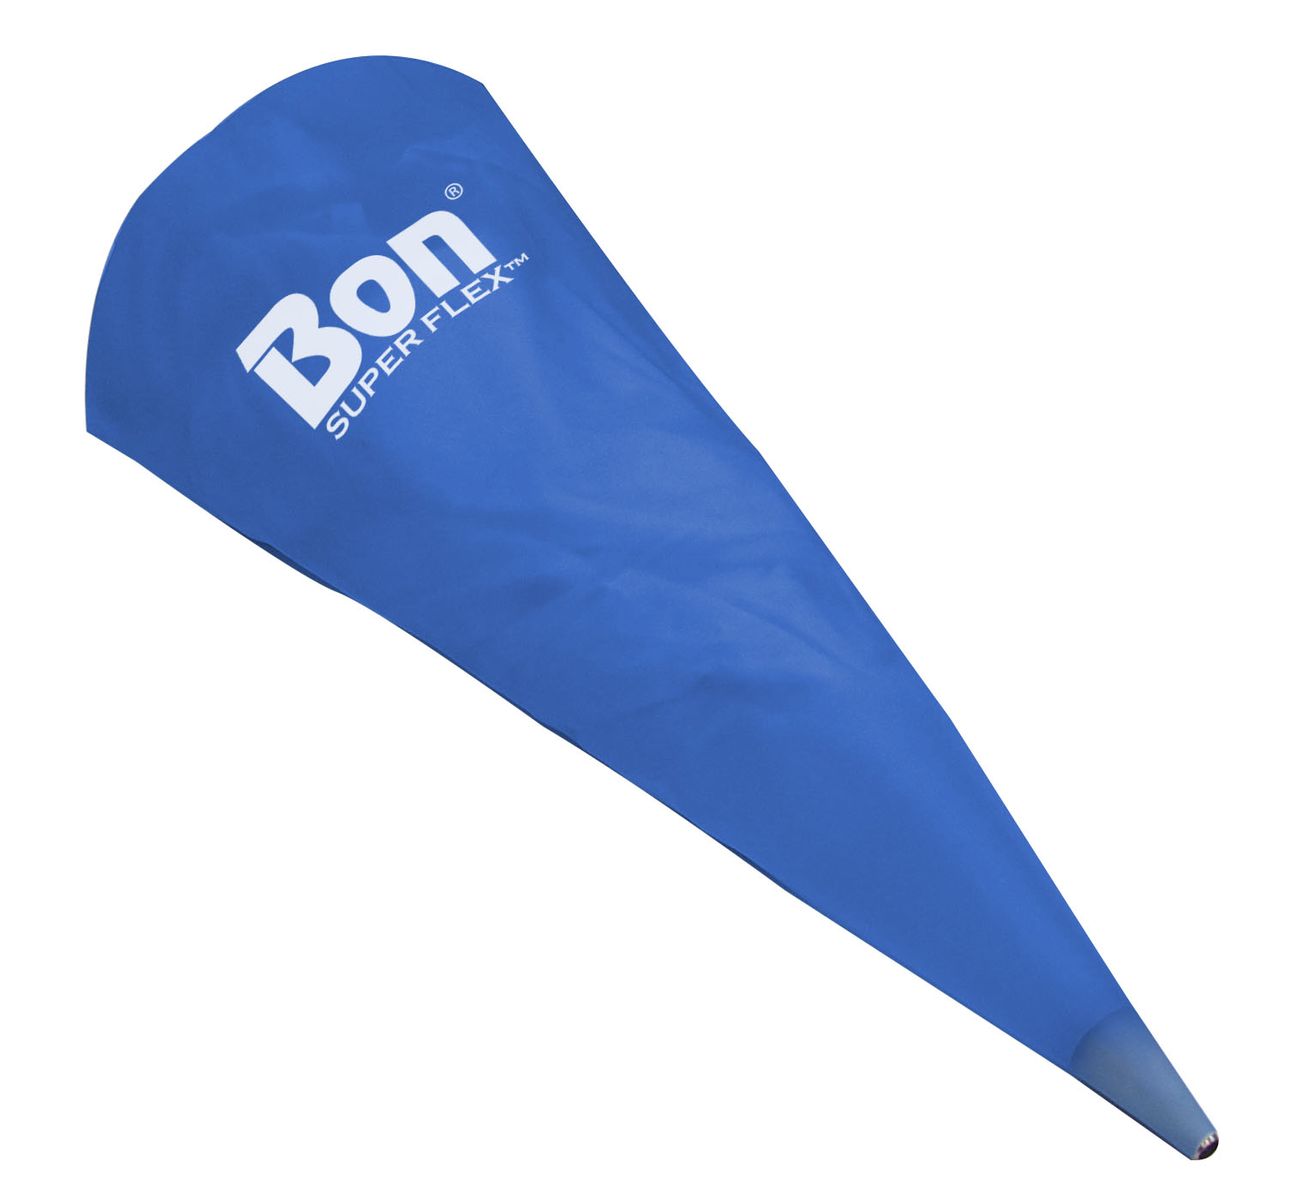 Specify part #21-167 for more information on Bons new Super Flex Silicone Grout Bag.